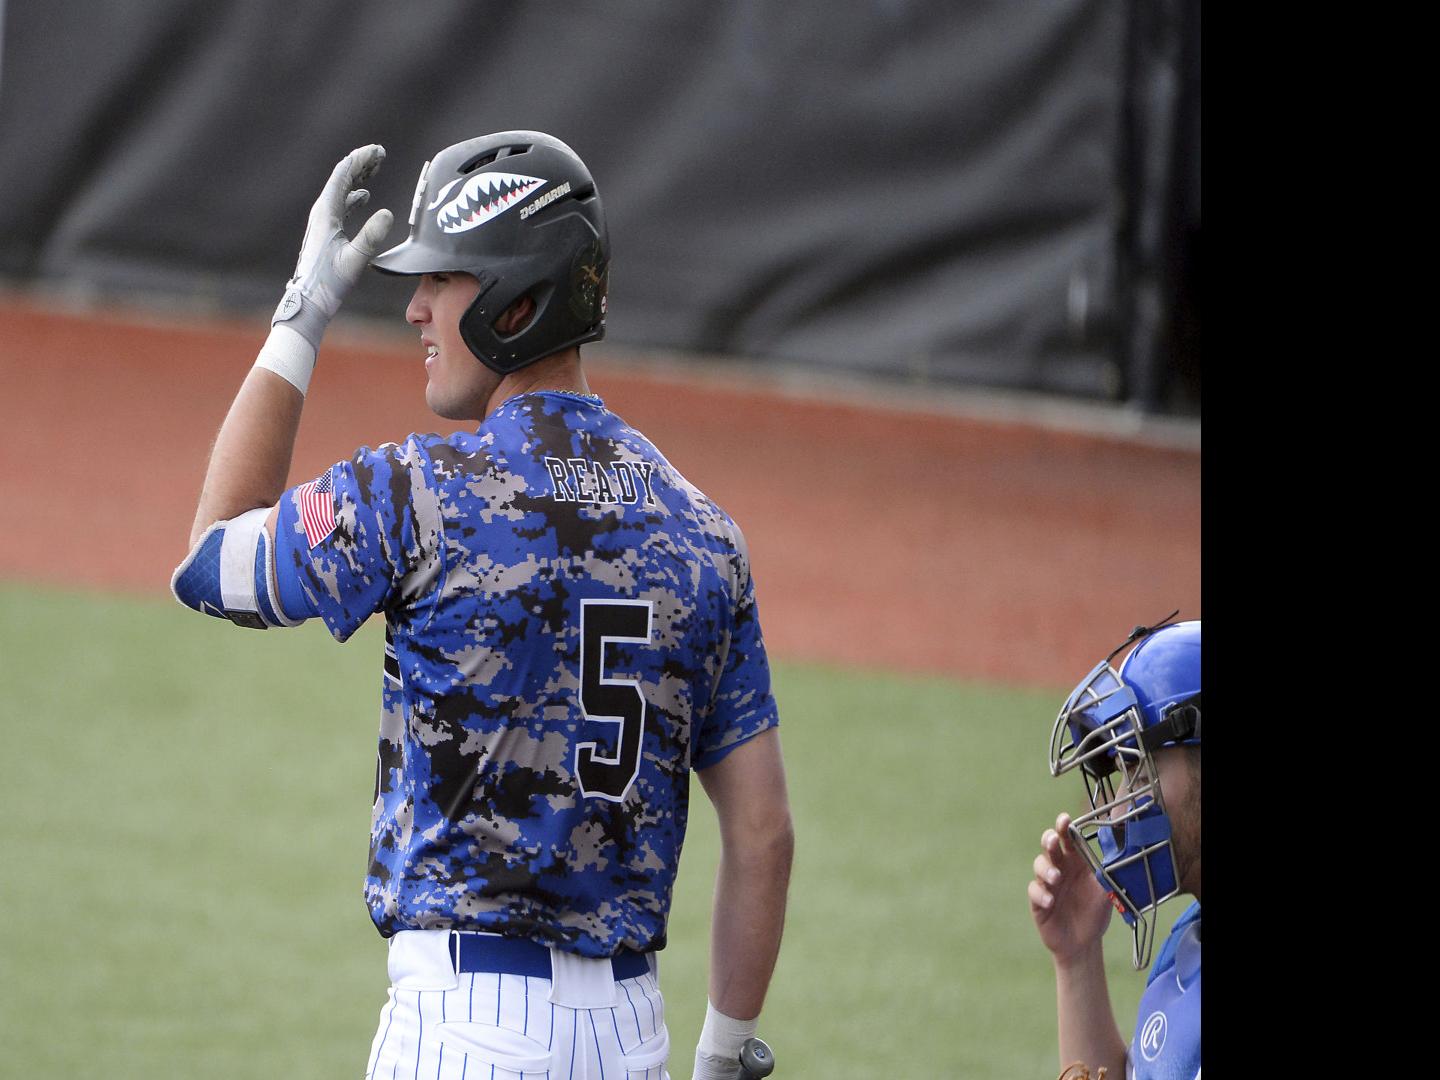 Air Force baseball coach on policy that would allow grads to play